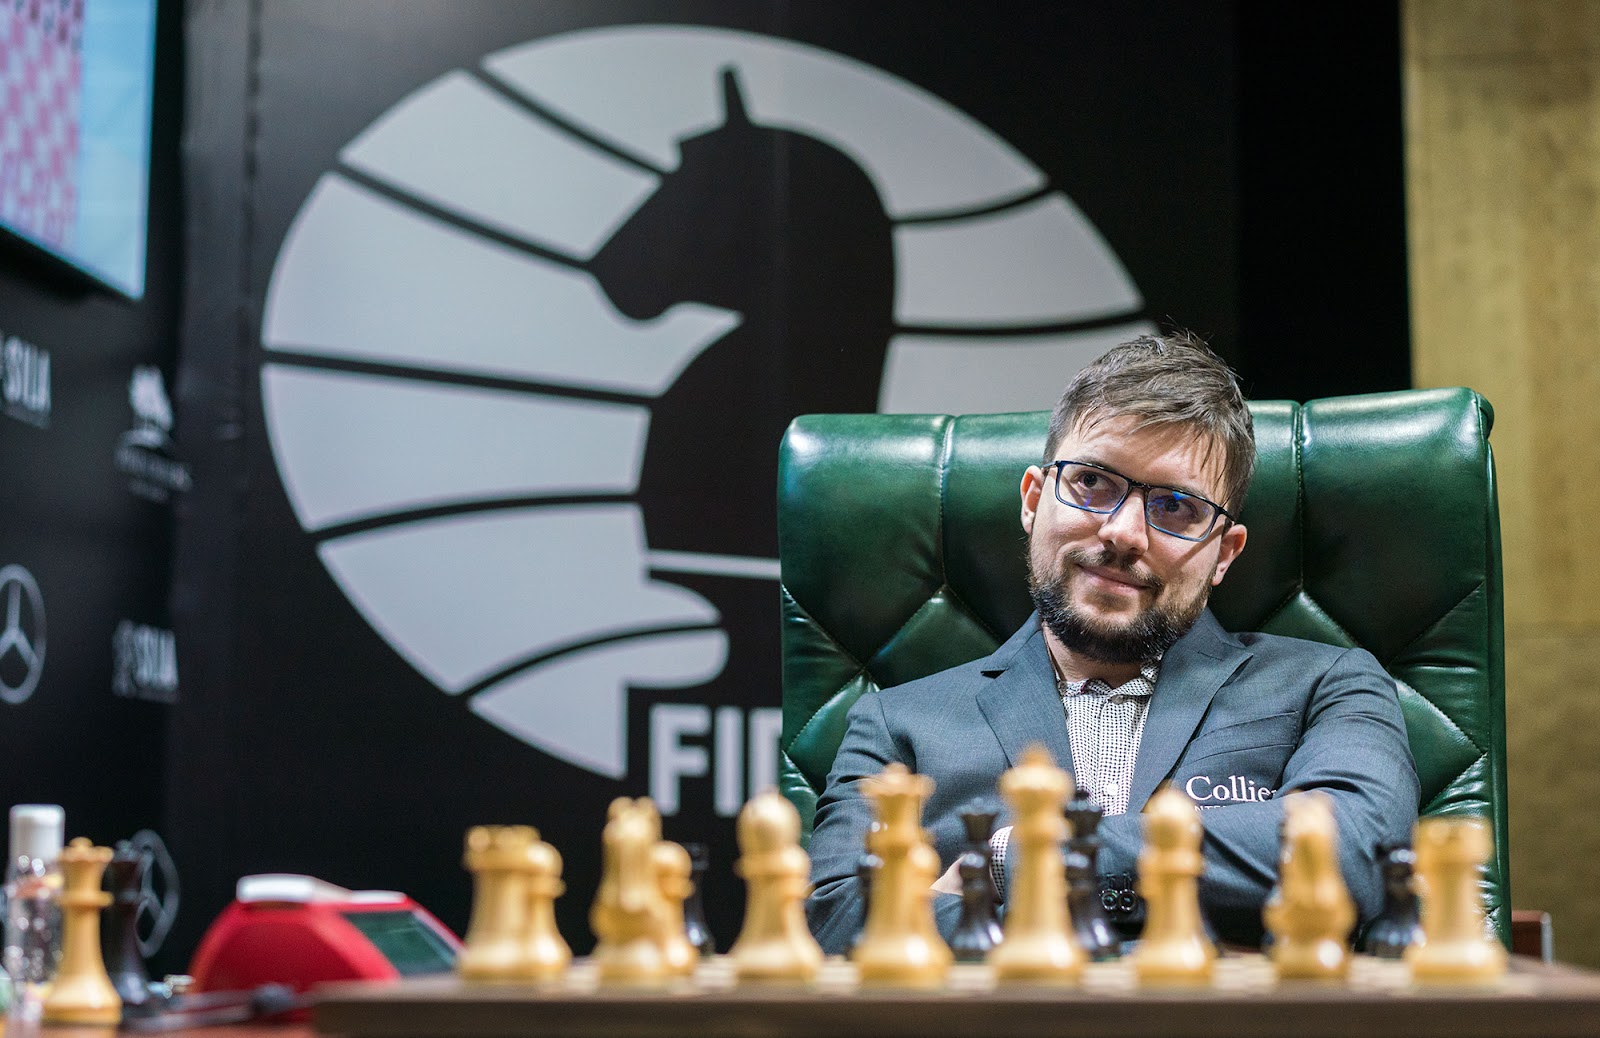 All four games drawn in Round 3 of the FIDE Candidates